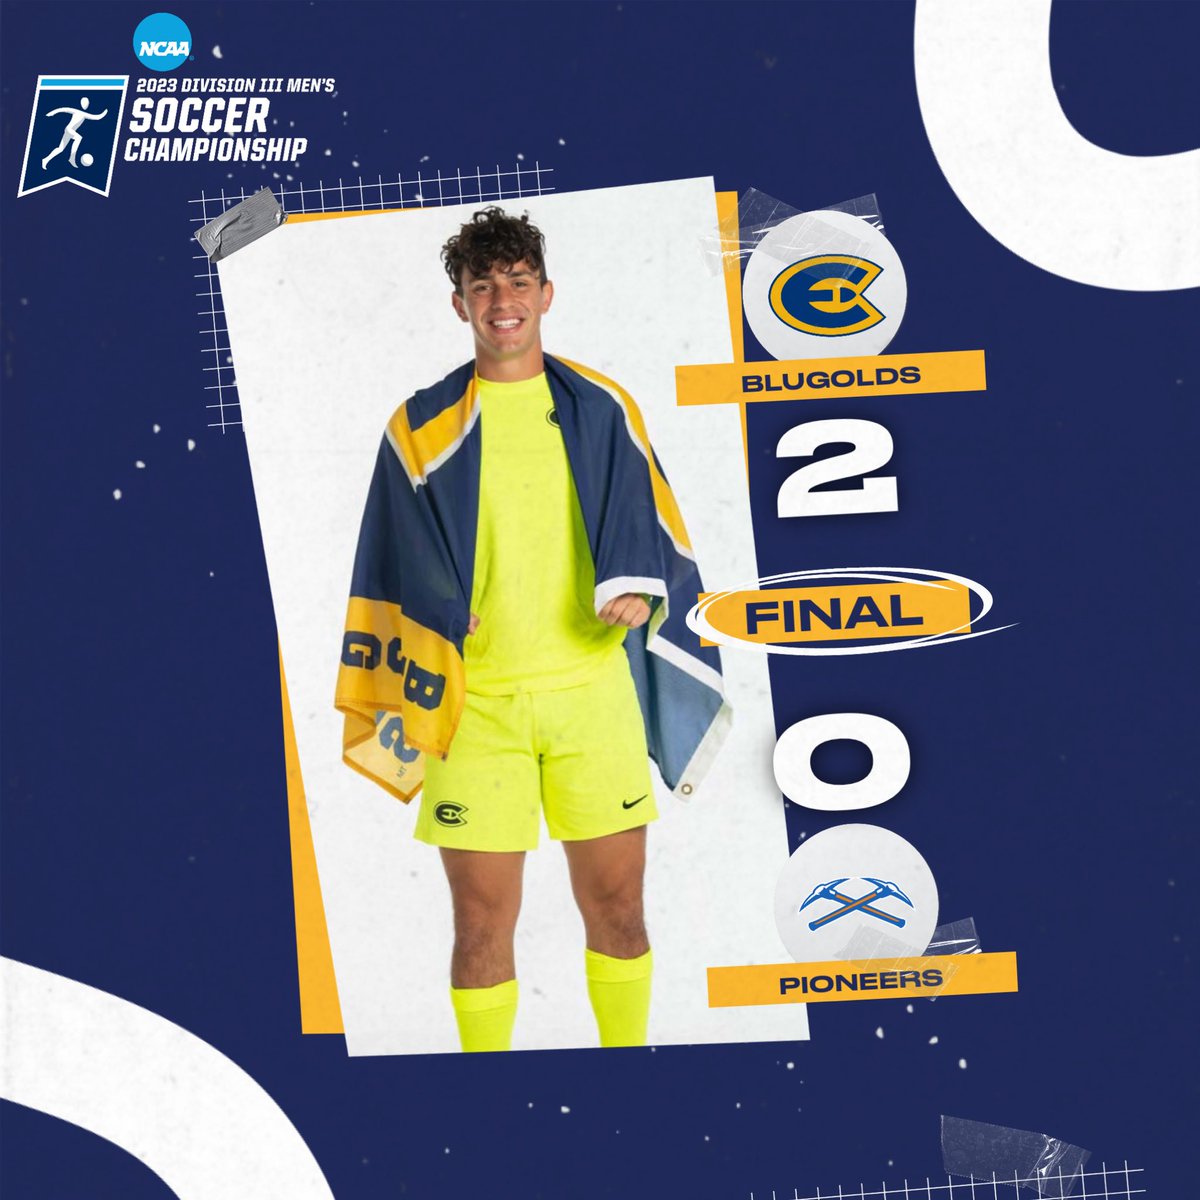 THE BLUGOLDS KEEP ON DANCIN’!💃🕺 @uwecmsoccer keeps the clean sheet through the second half to secure the victory and move on to the @NCAADIII Sweet 16! #RollGolds